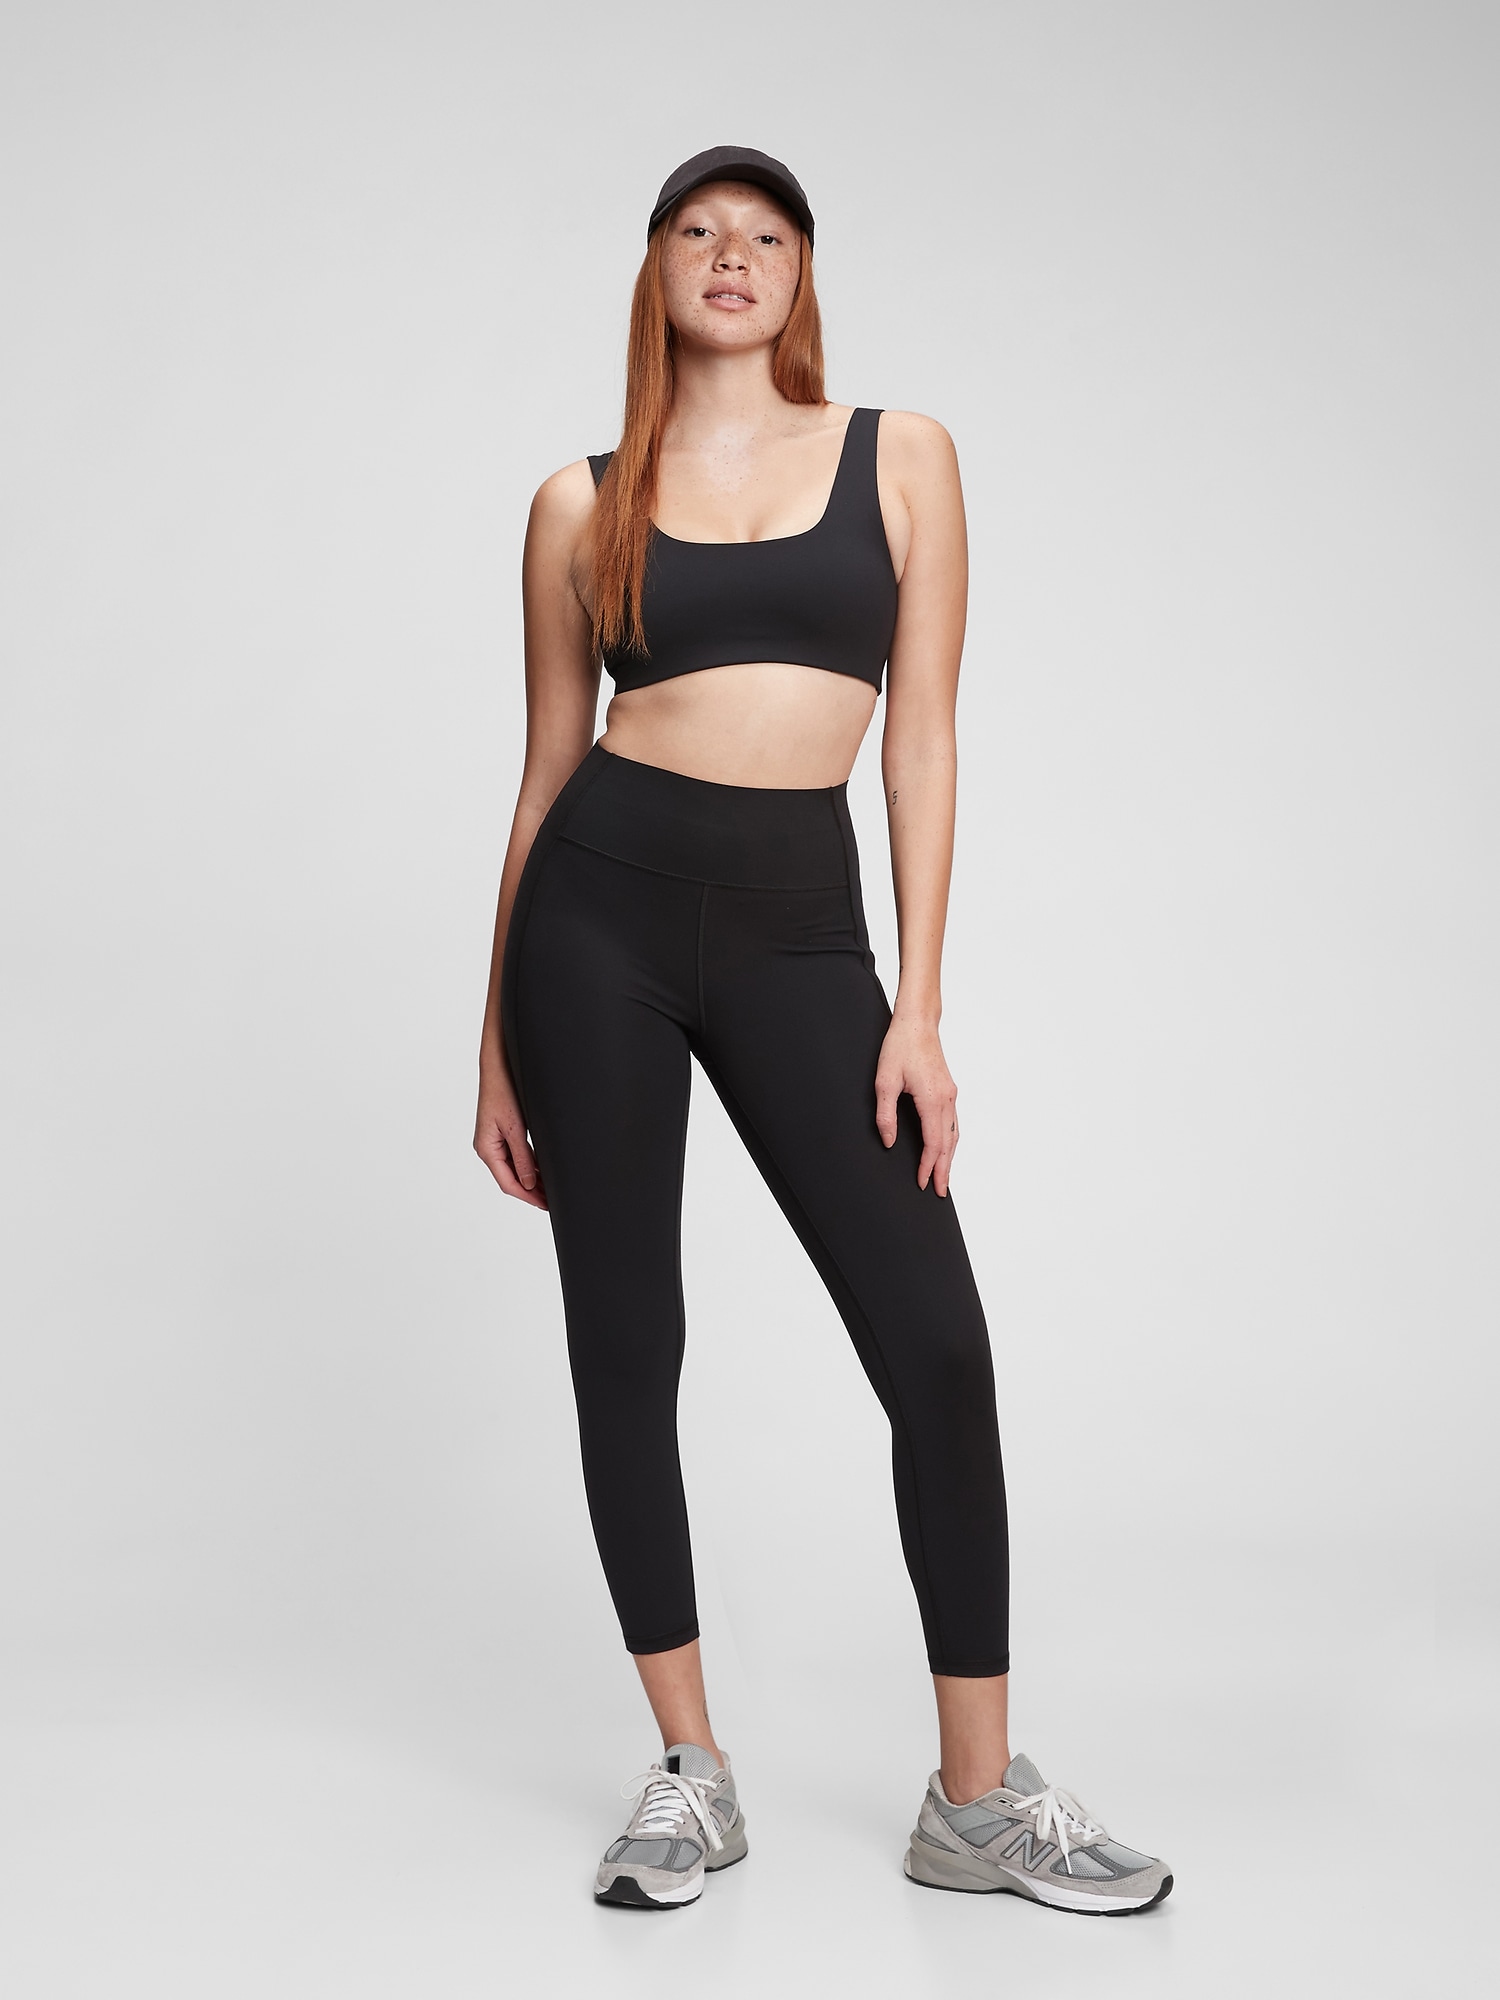 Shop Gap Women's High Waisted Gym Leggings up to 70% Off